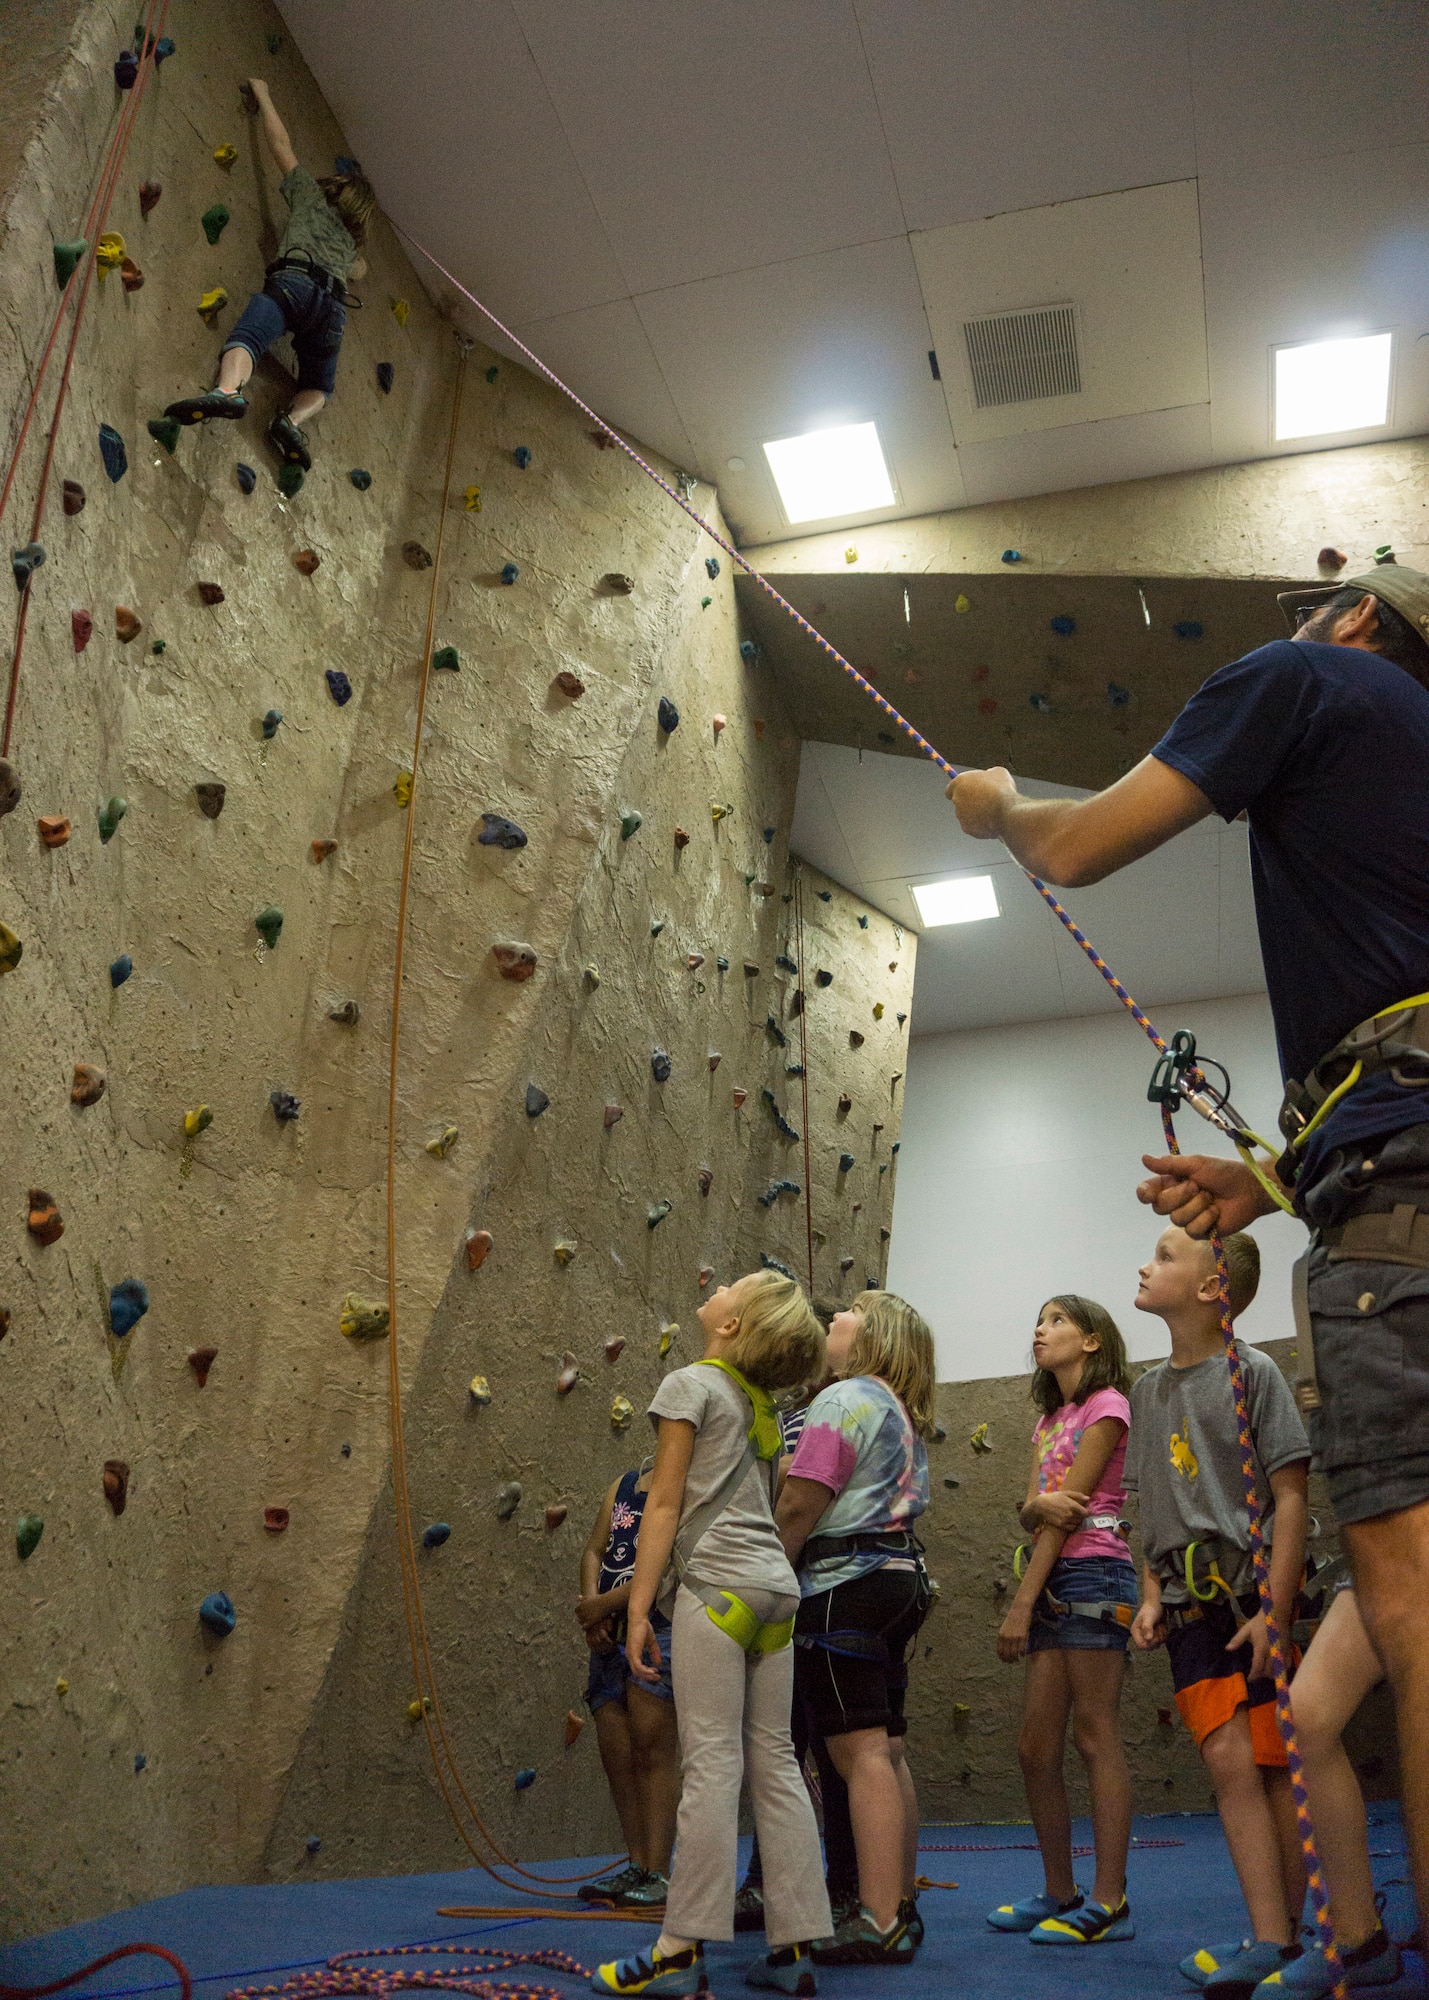 Baileigh Mitchell, 9, daughter of Master Sgt. Kenneth Mitchell, 90th Missile Security Forces Squadron, climbs the indoor rock wall in the Fall Hall Community Center on F.E. Warren Air Force Base, June 8, 2015. The rock wall was one of the activities Outdoor Recreation hosted as part of Basic Recreation Adventure Training Camp for children aged 7-10. (U.S. Air Force photo by Lan Kim)